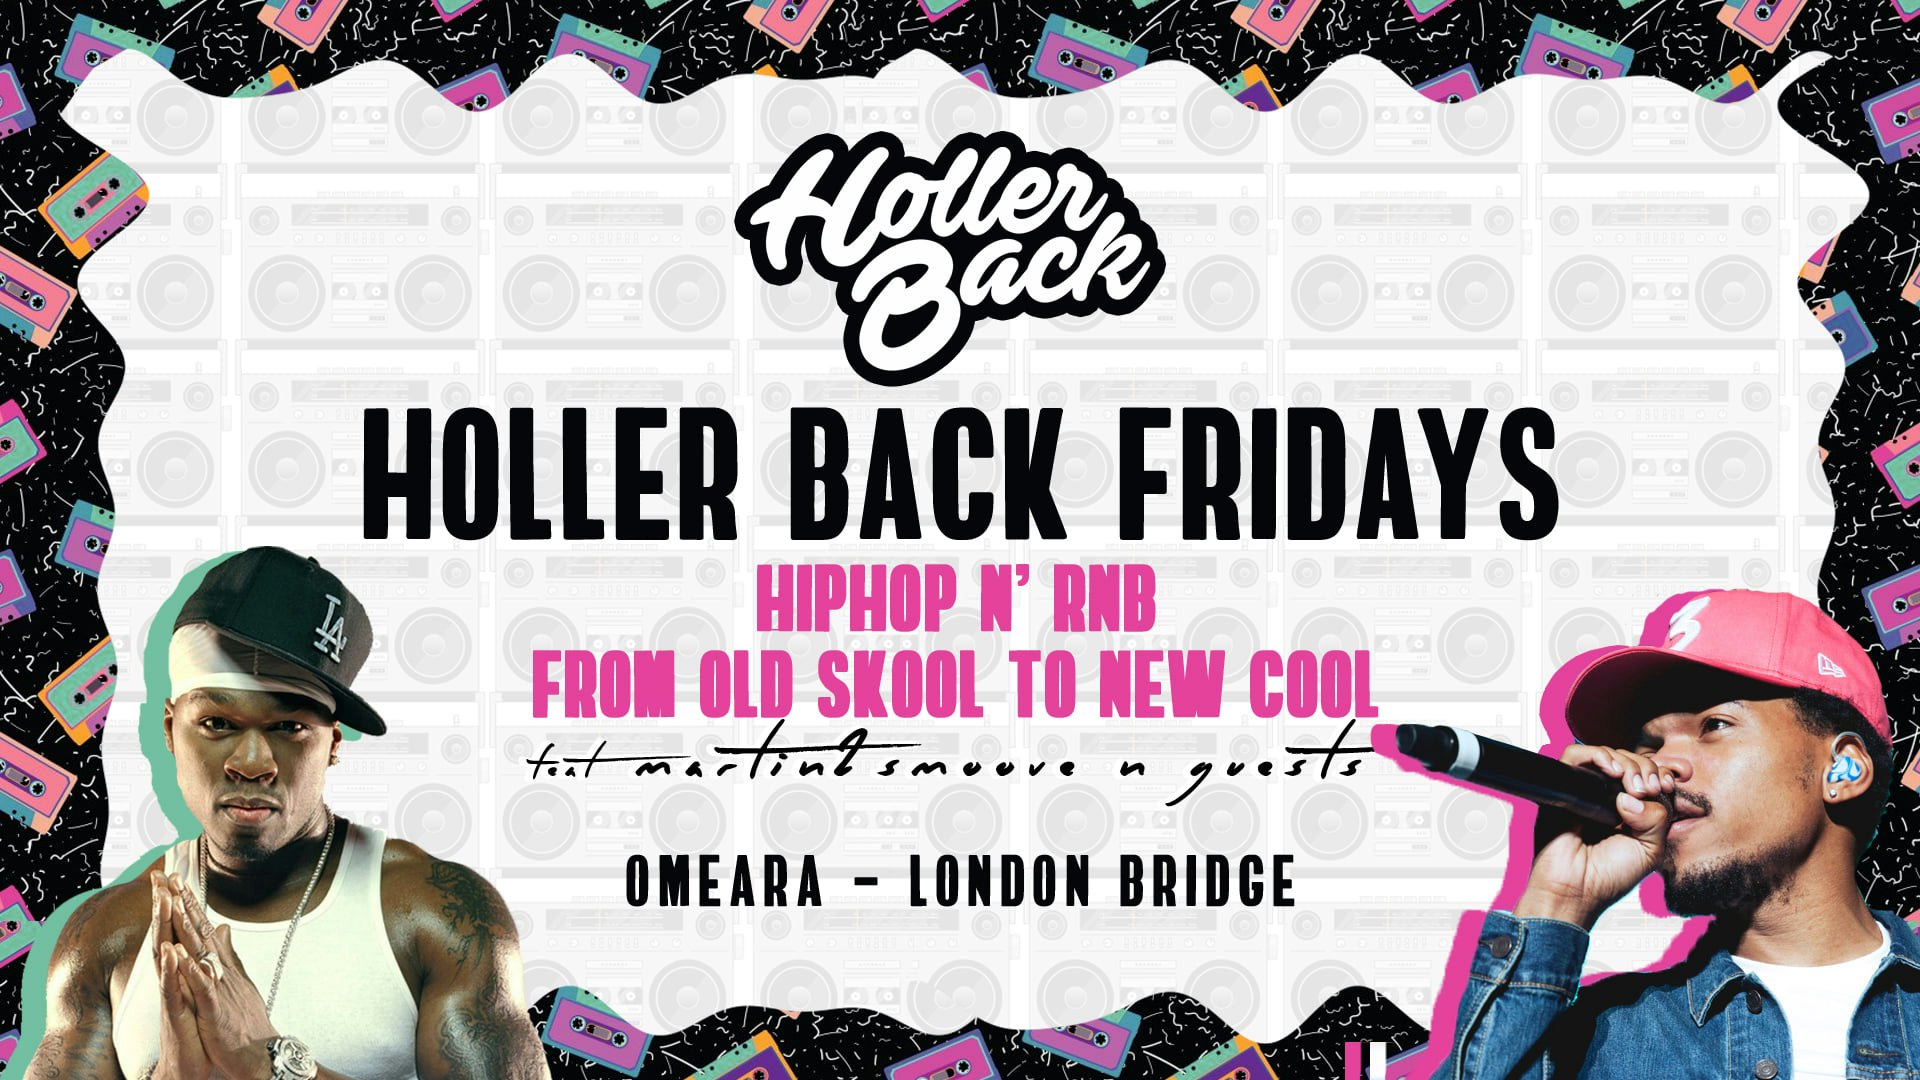 Tonight – Holler Back | HipHop n R&B at Omeara London… Free Student Tickets!